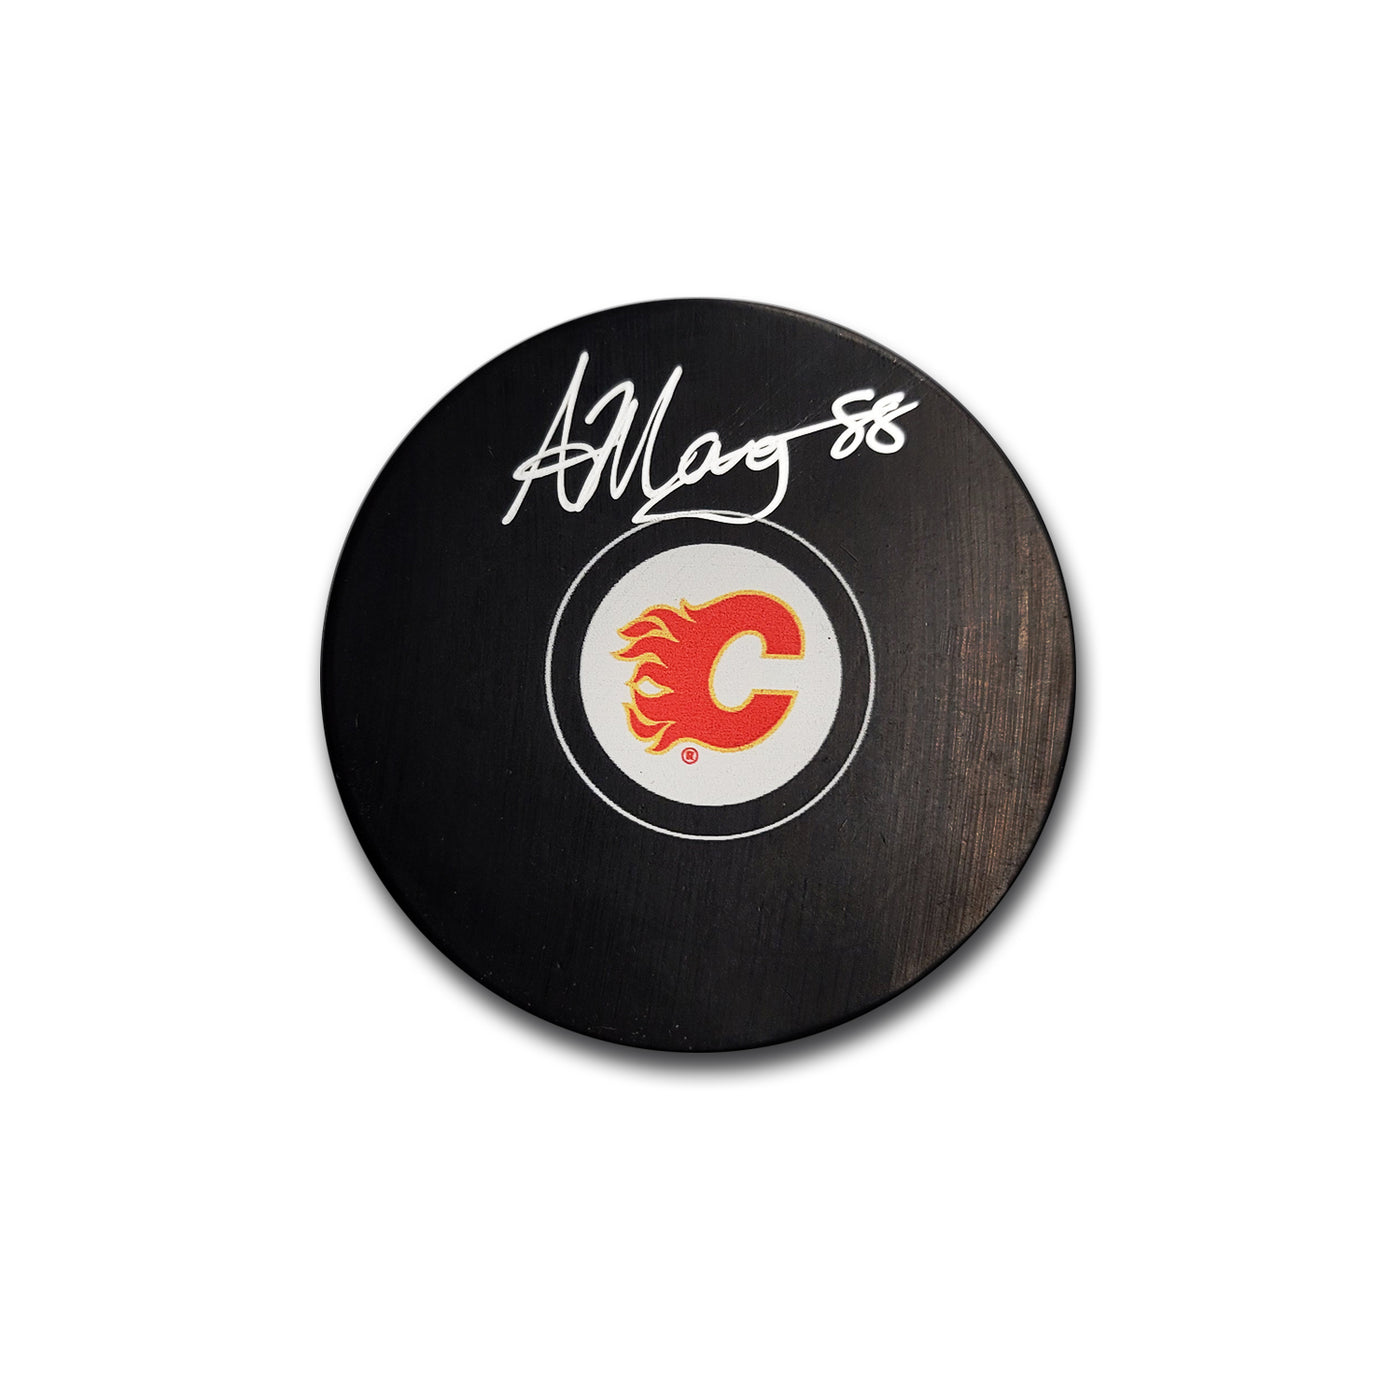 Andrew Mangiapane Calgary Flames Autographed Hockey Puck